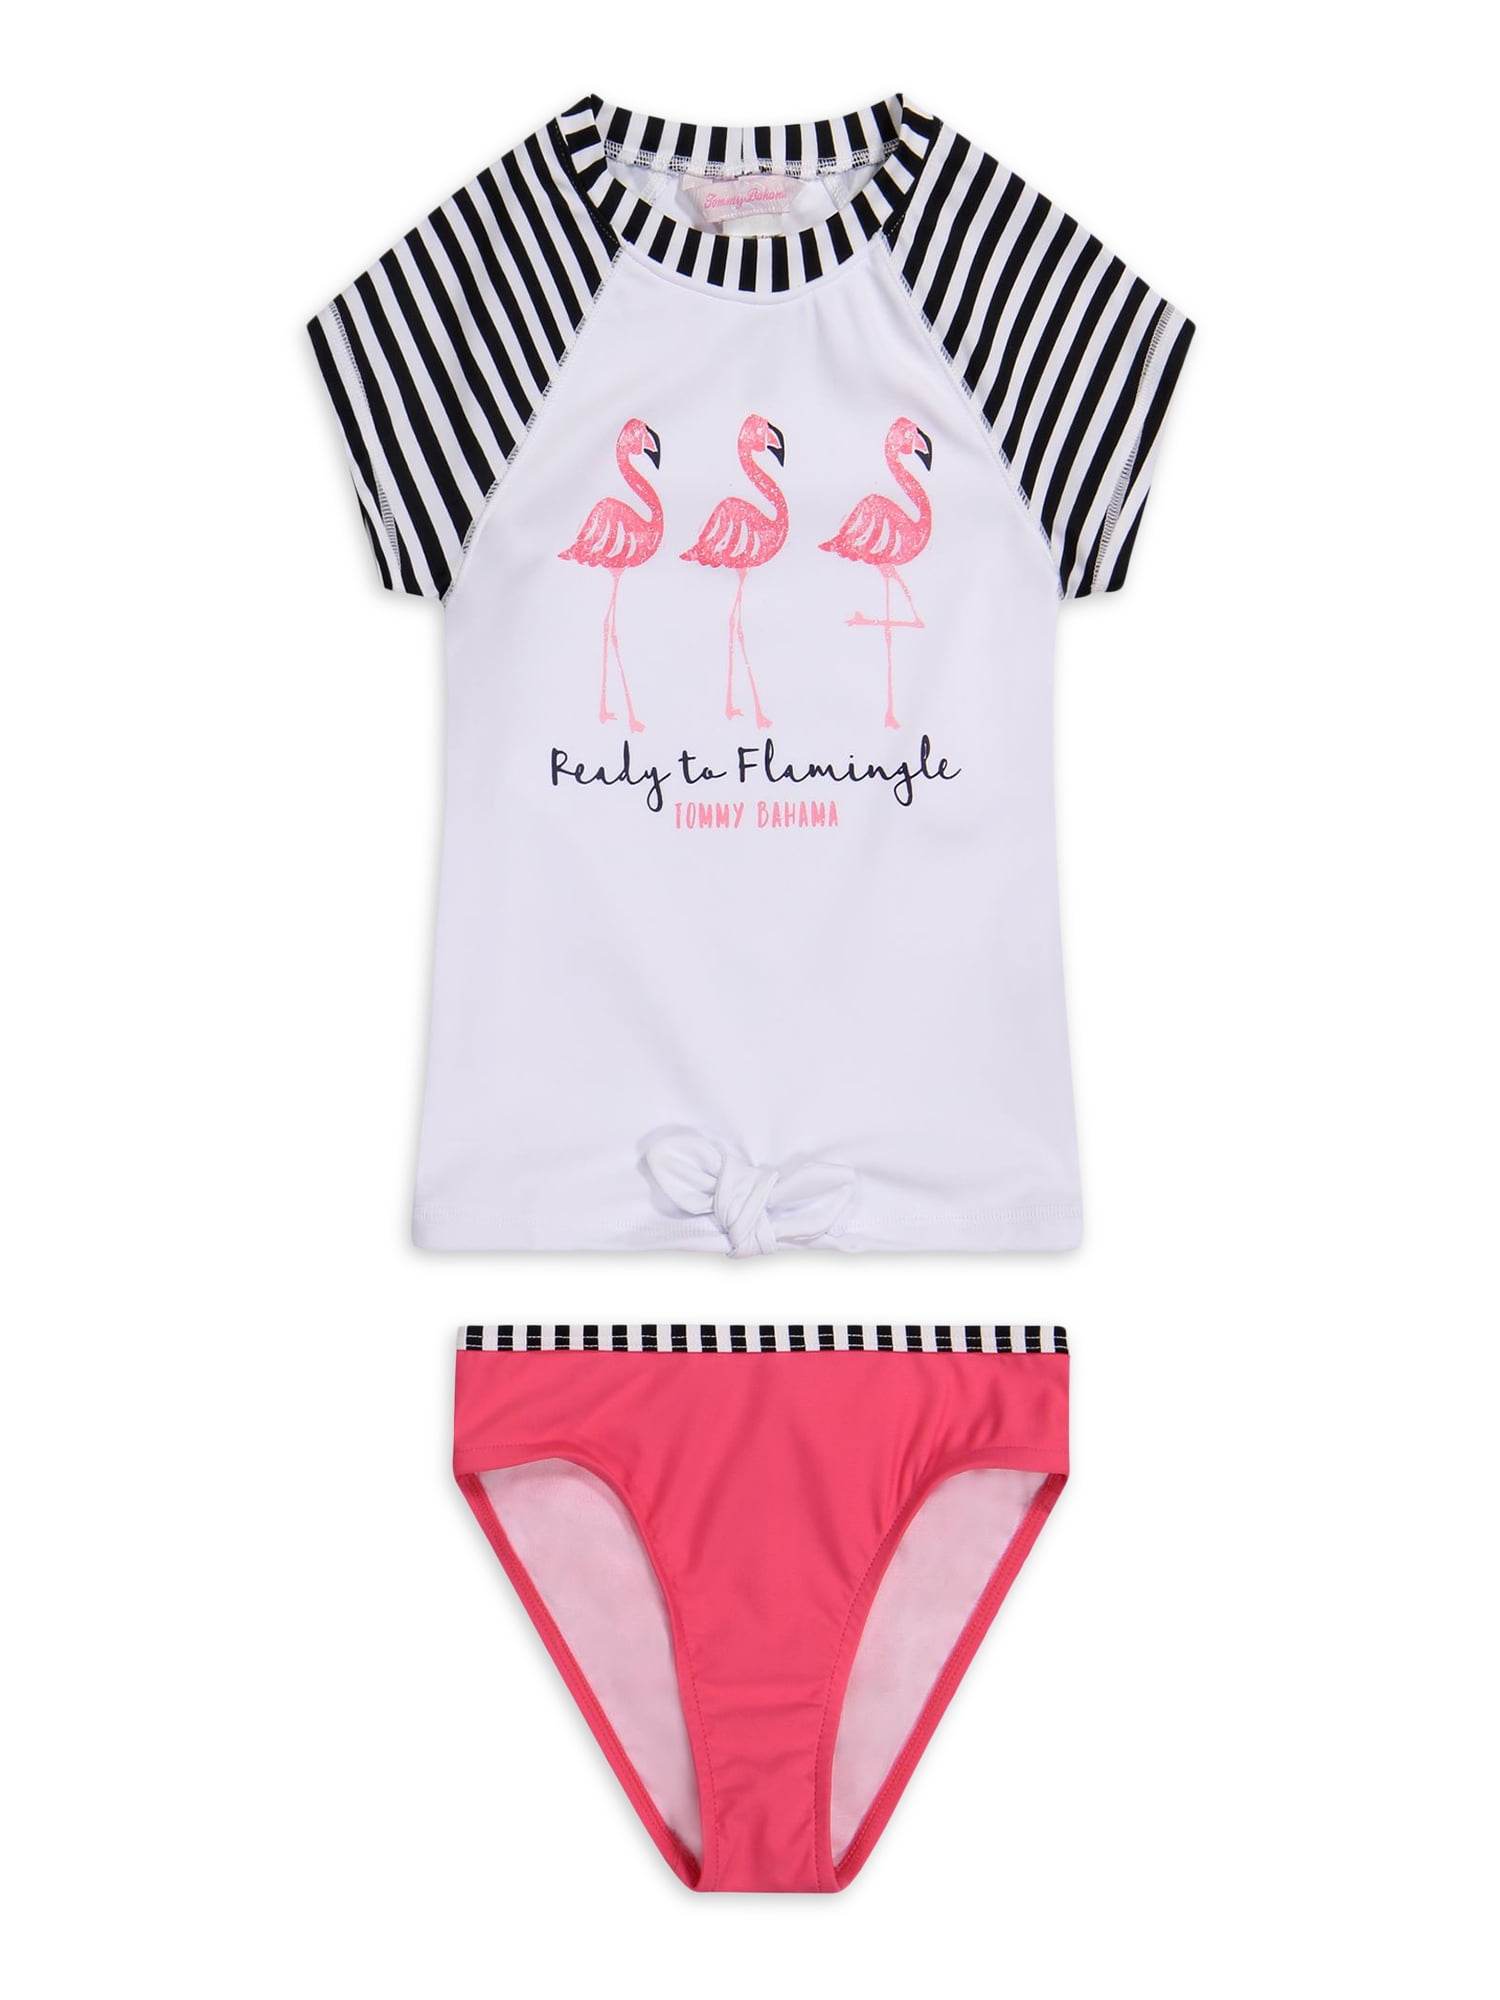 Details about   New Tommy Bahama Pink Flamingo Metallic Bow One Piece Swimsuit Girl Todder 2T 4T 